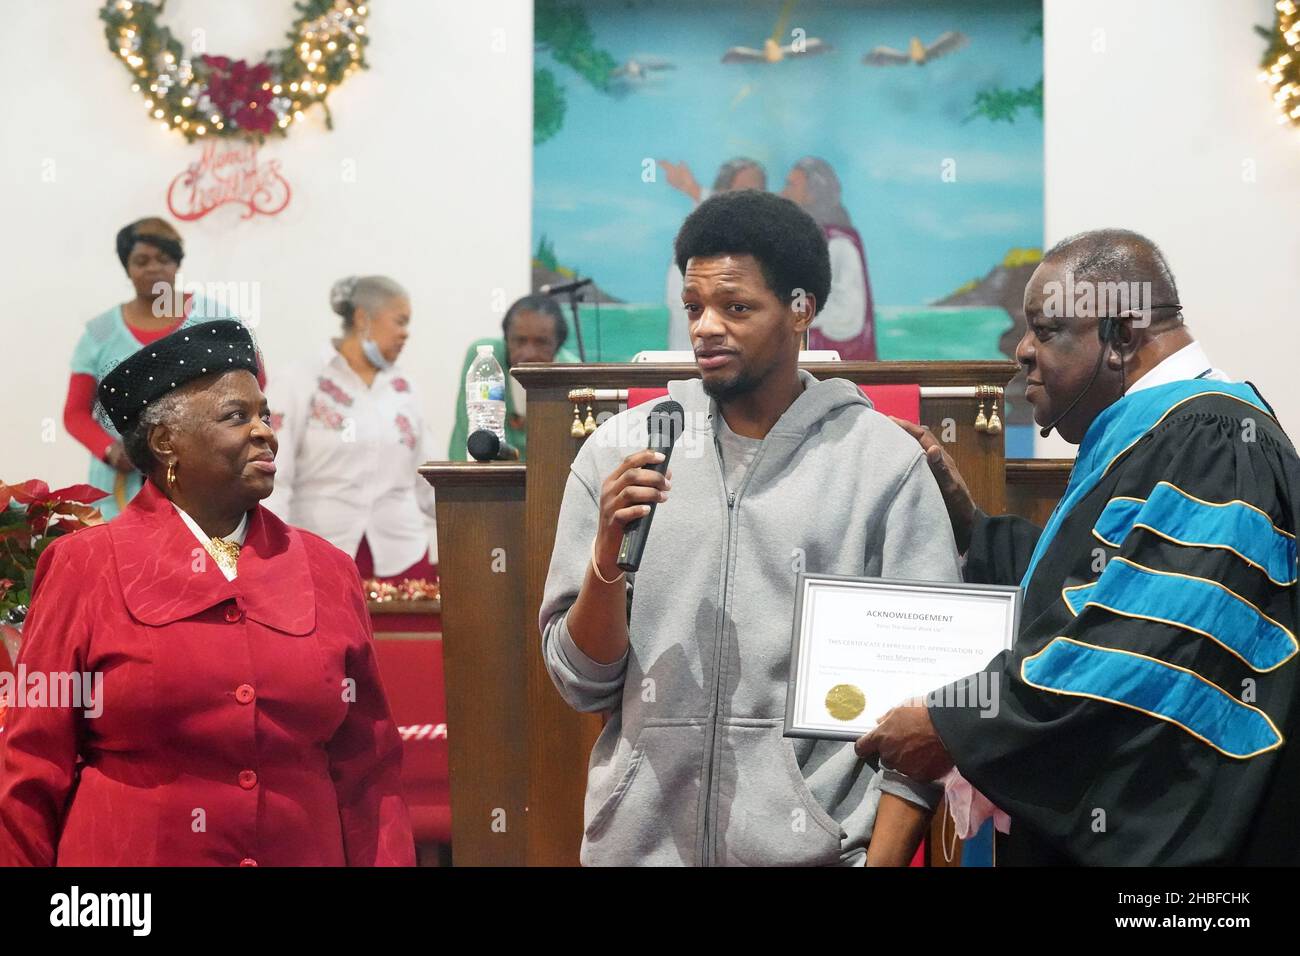 Arnez Merriweather (C) makes his remarks after being recognized by Dr. Maggie Williams and Pastor Donald Ray McNeal for his actions of saving a baby and mother from a fire, during a service at the Hopewell Missionary Baptist Church in St. Louis on Sunday, December 19, 2021. Merrriweather saved a 3-year-old girl whose mother tossed her out of a second-floor window to escape a fire at an apartment building in north St. Louis on Monday, November 29, 2021. Merriweather then caught the mother who jumped. Merriweather, 30, said he did it by remaining calm and simply doing what was needed. Credit: UP Stock Photo